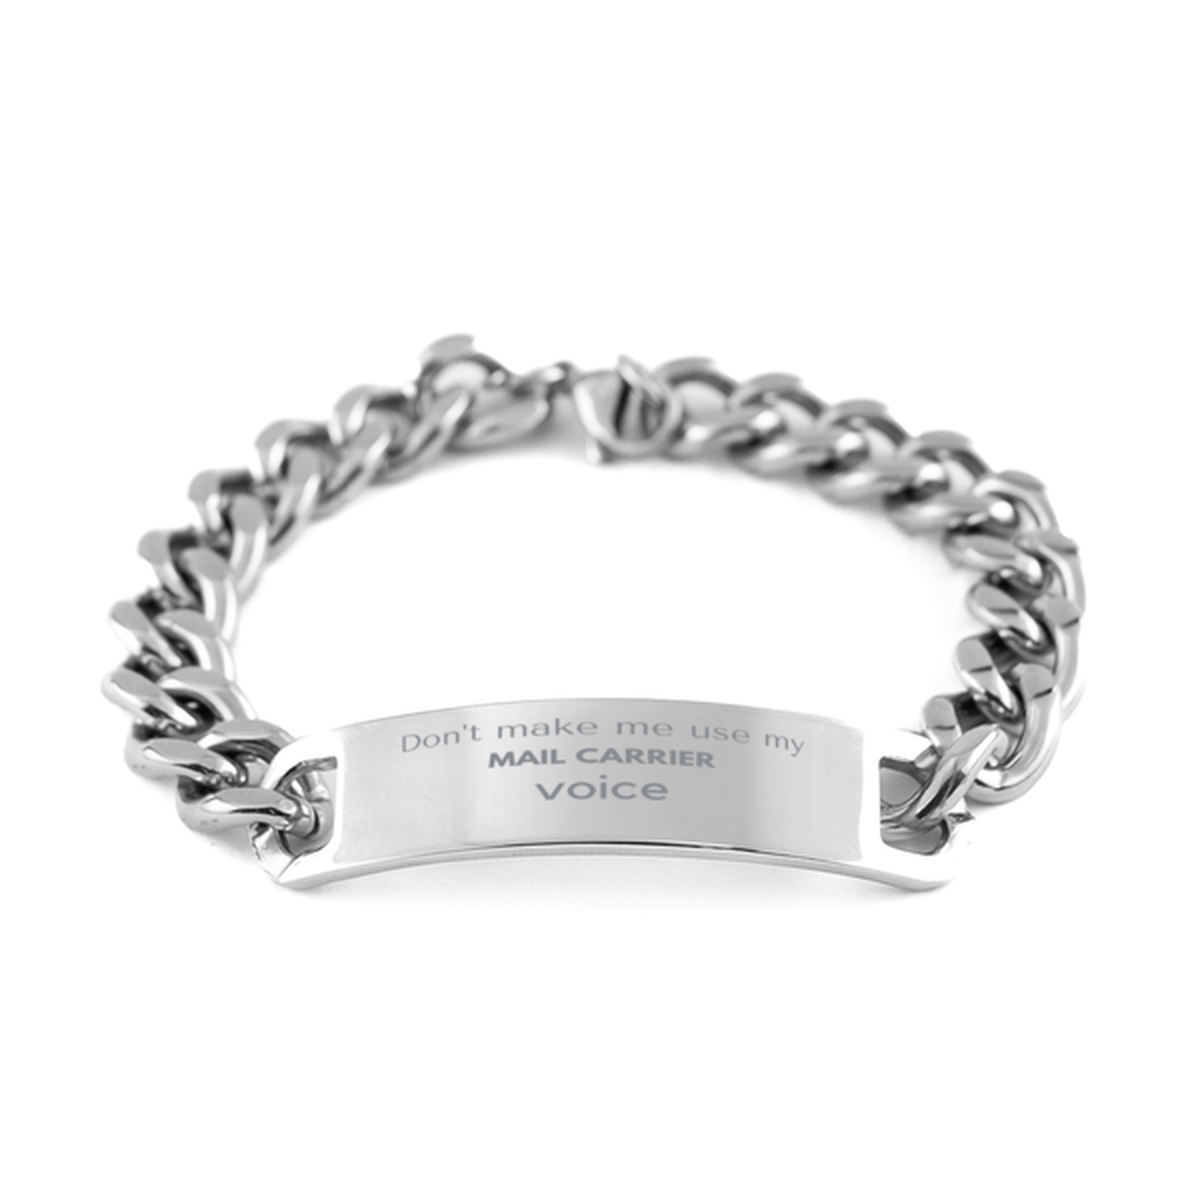 Don't make me use my Mail Carrier voice, Sarcasm Mail Carrier Gifts, Christmas Mail Carrier Cuban Chain Stainless Steel Bracelet Birthday Unique Gifts For Mail Carrier Coworkers, Men, Women, Colleague, Friends